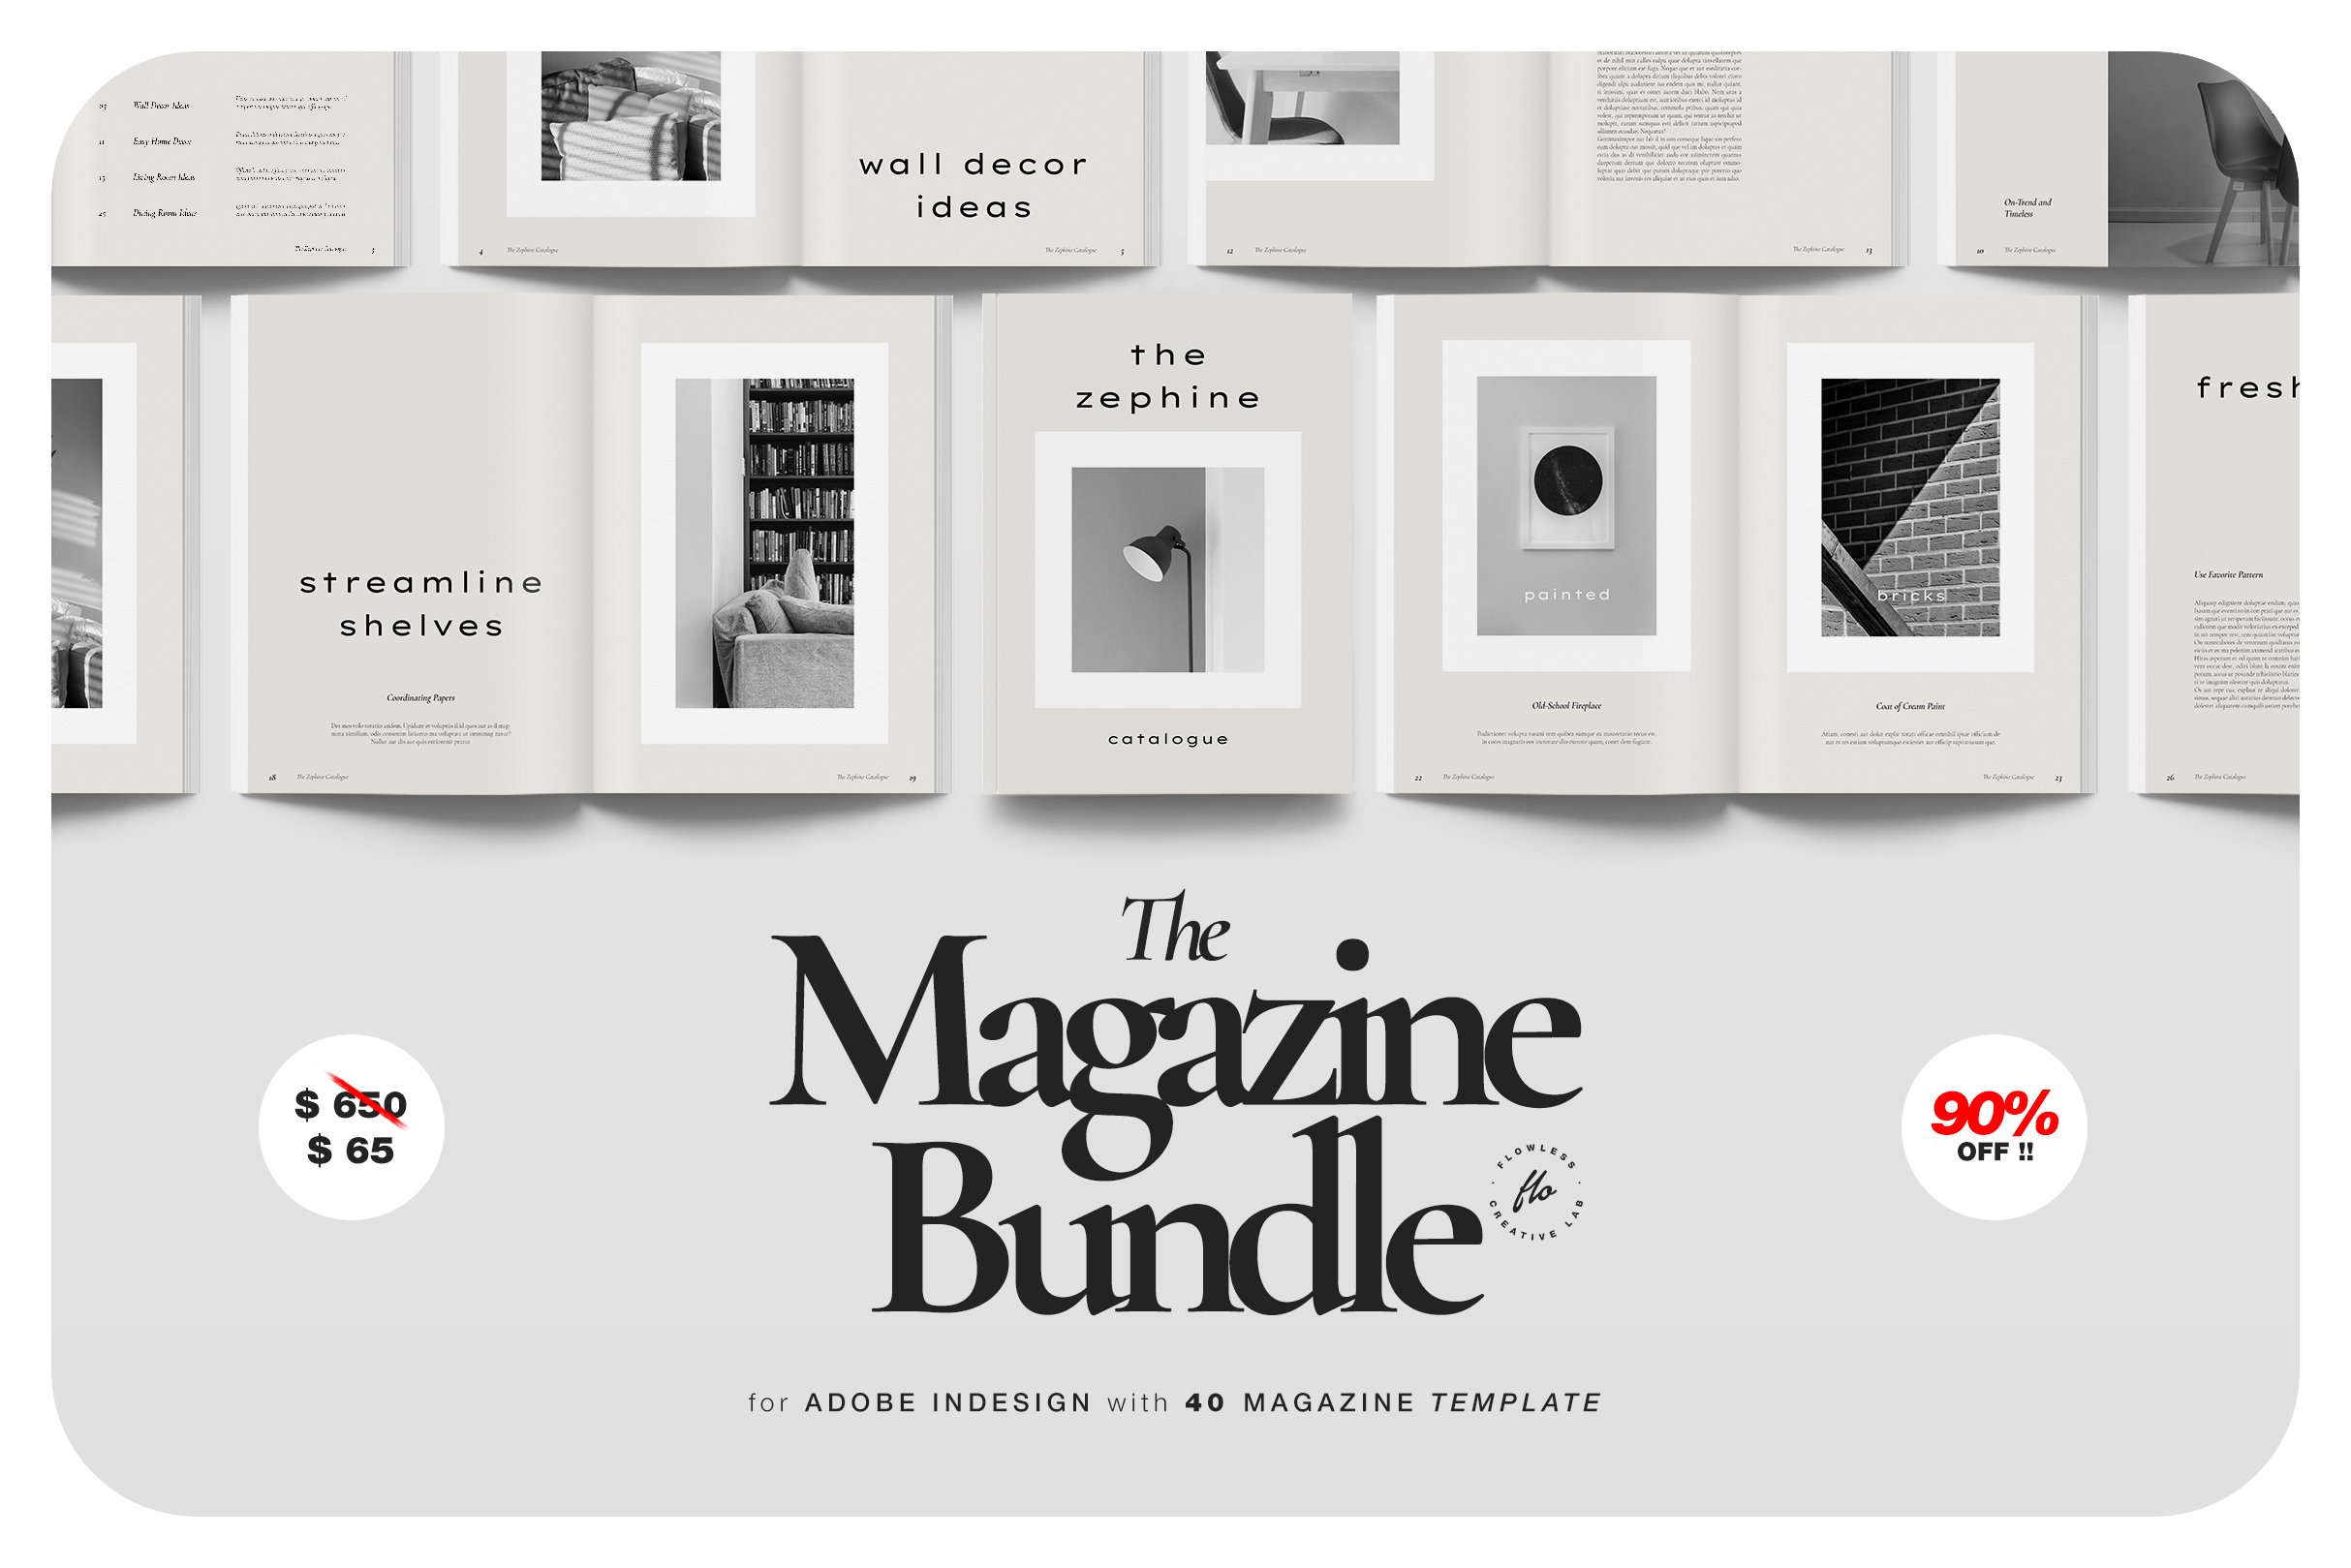 The Magazine Bundle (90% OFF) cover image.